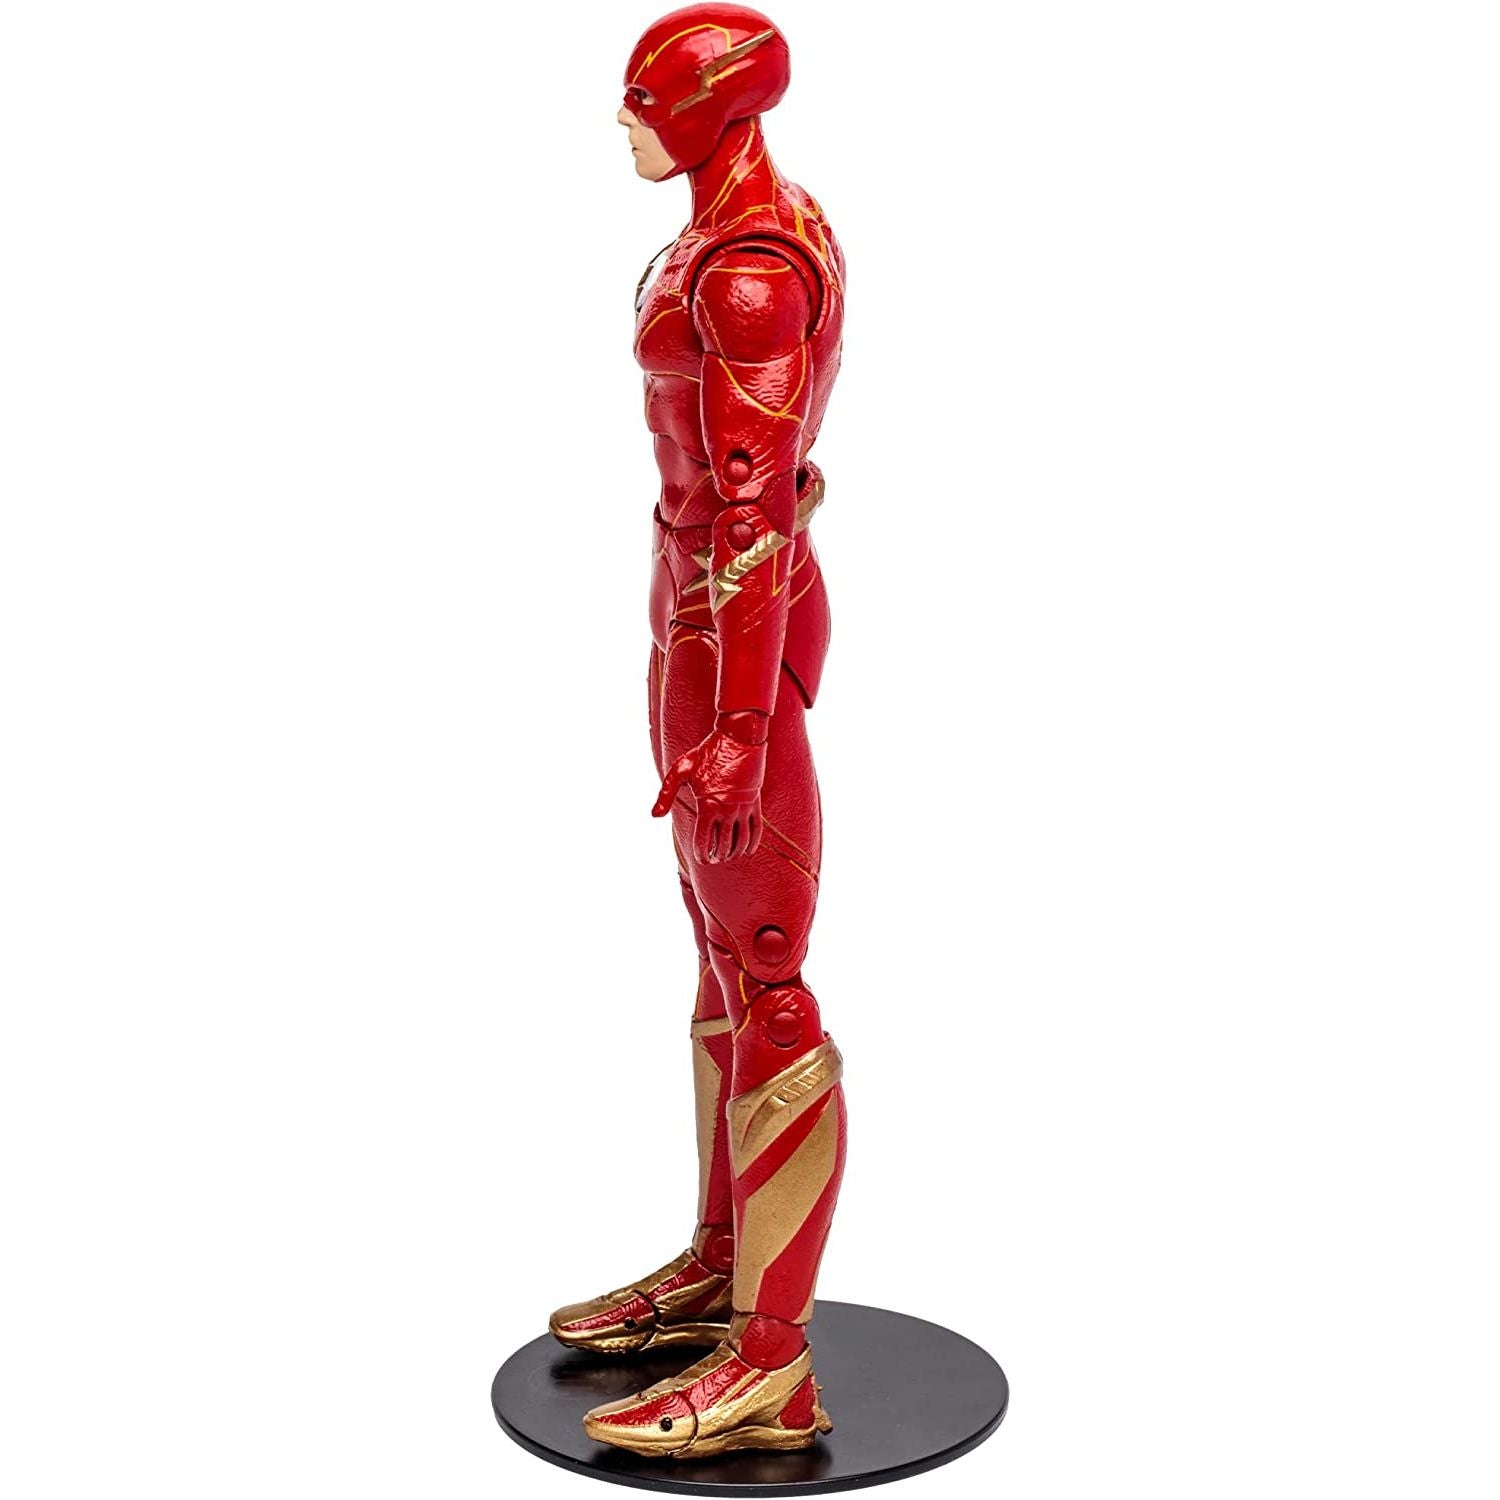 DC Multiverse - The Flash Movie - The Flash Action Figure 7INCh Toy left side Pose- Heretoserveyou